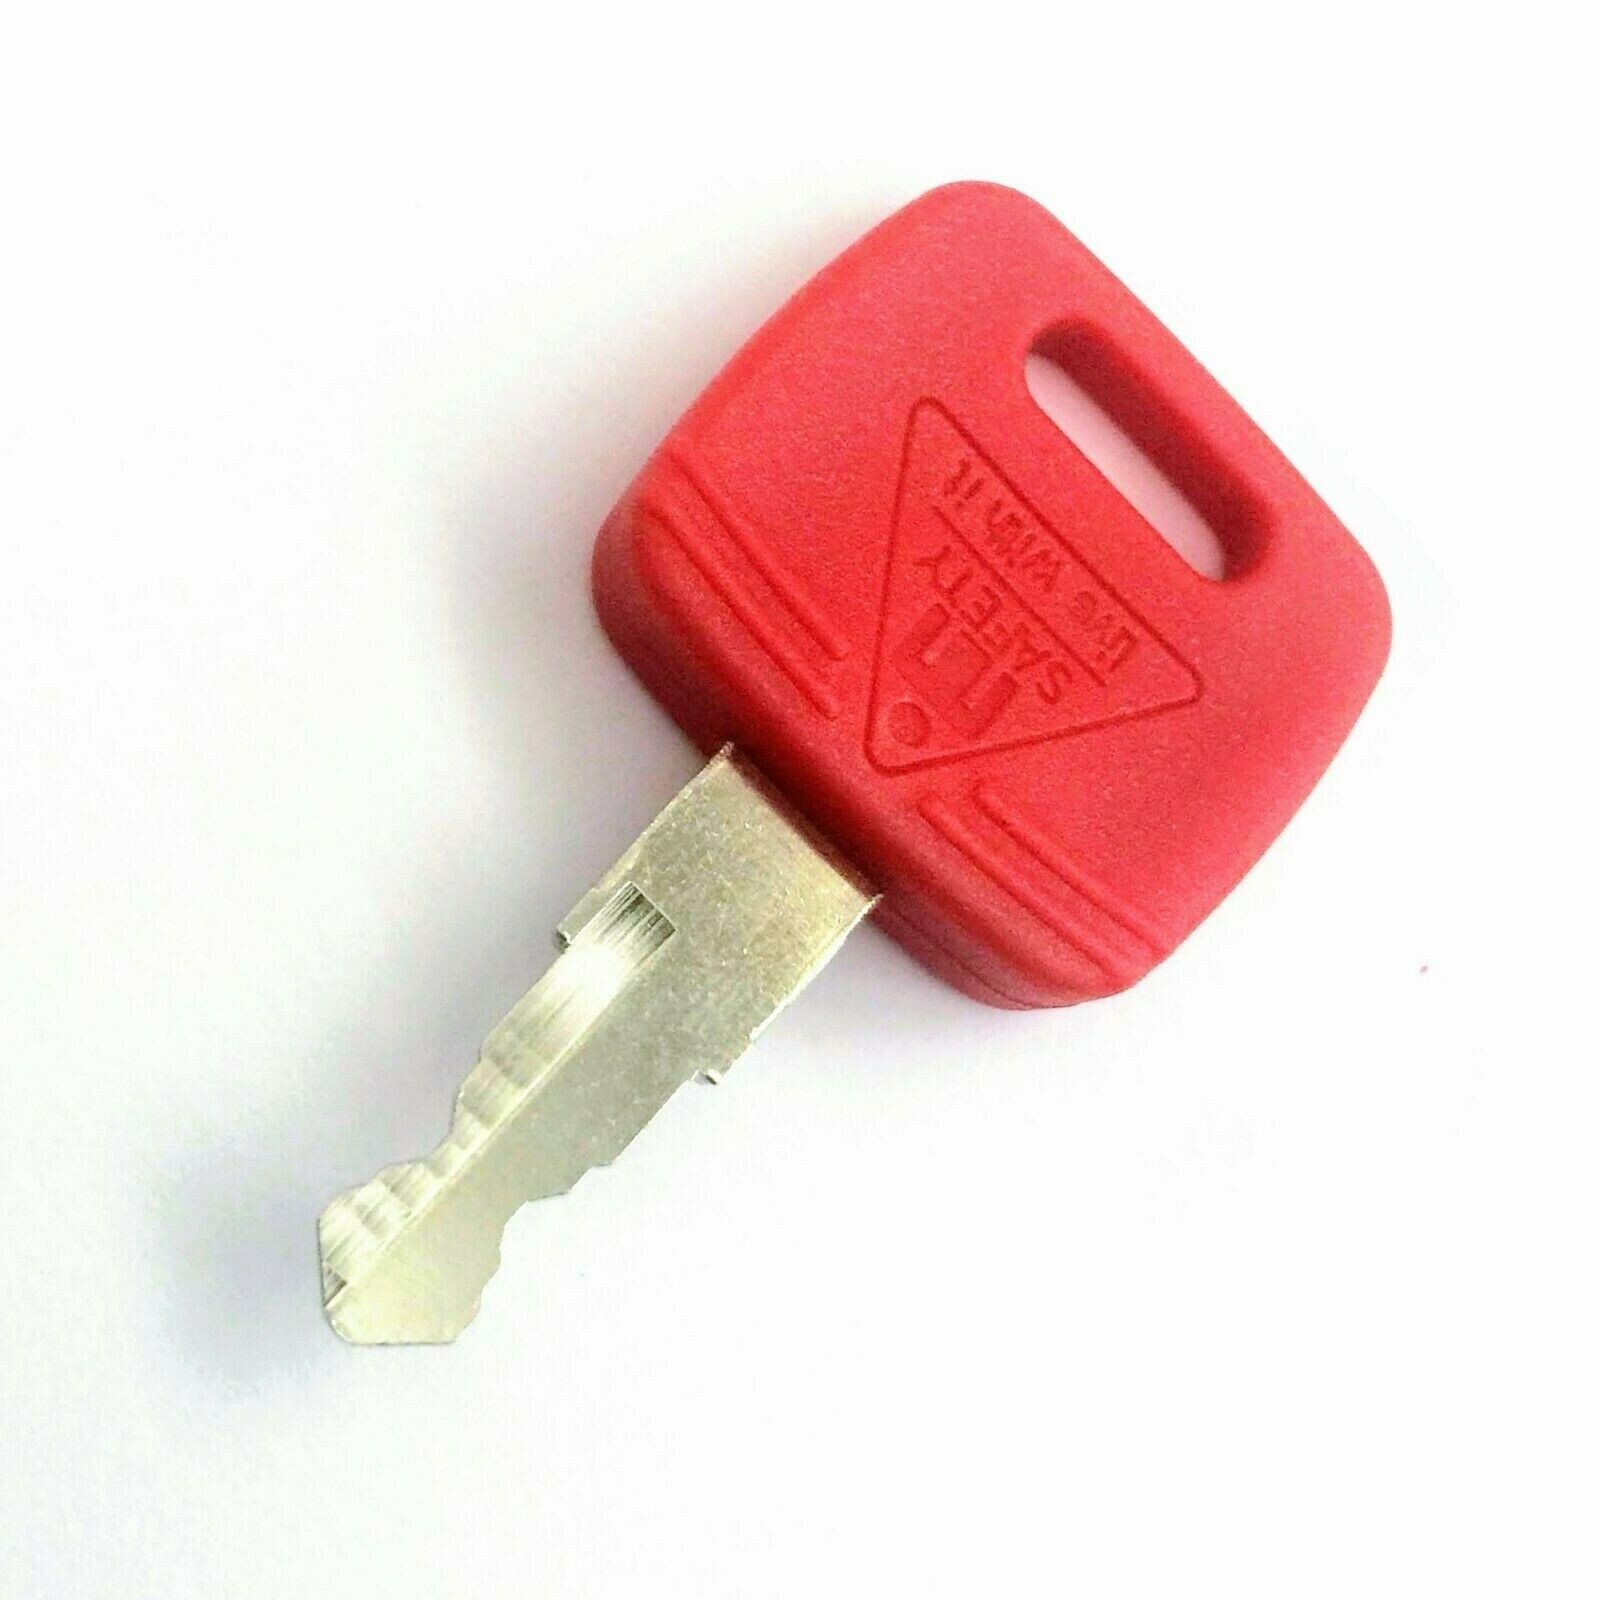 John Deere Ignition Key RE183935 for Tractors, Combines and Sprayers